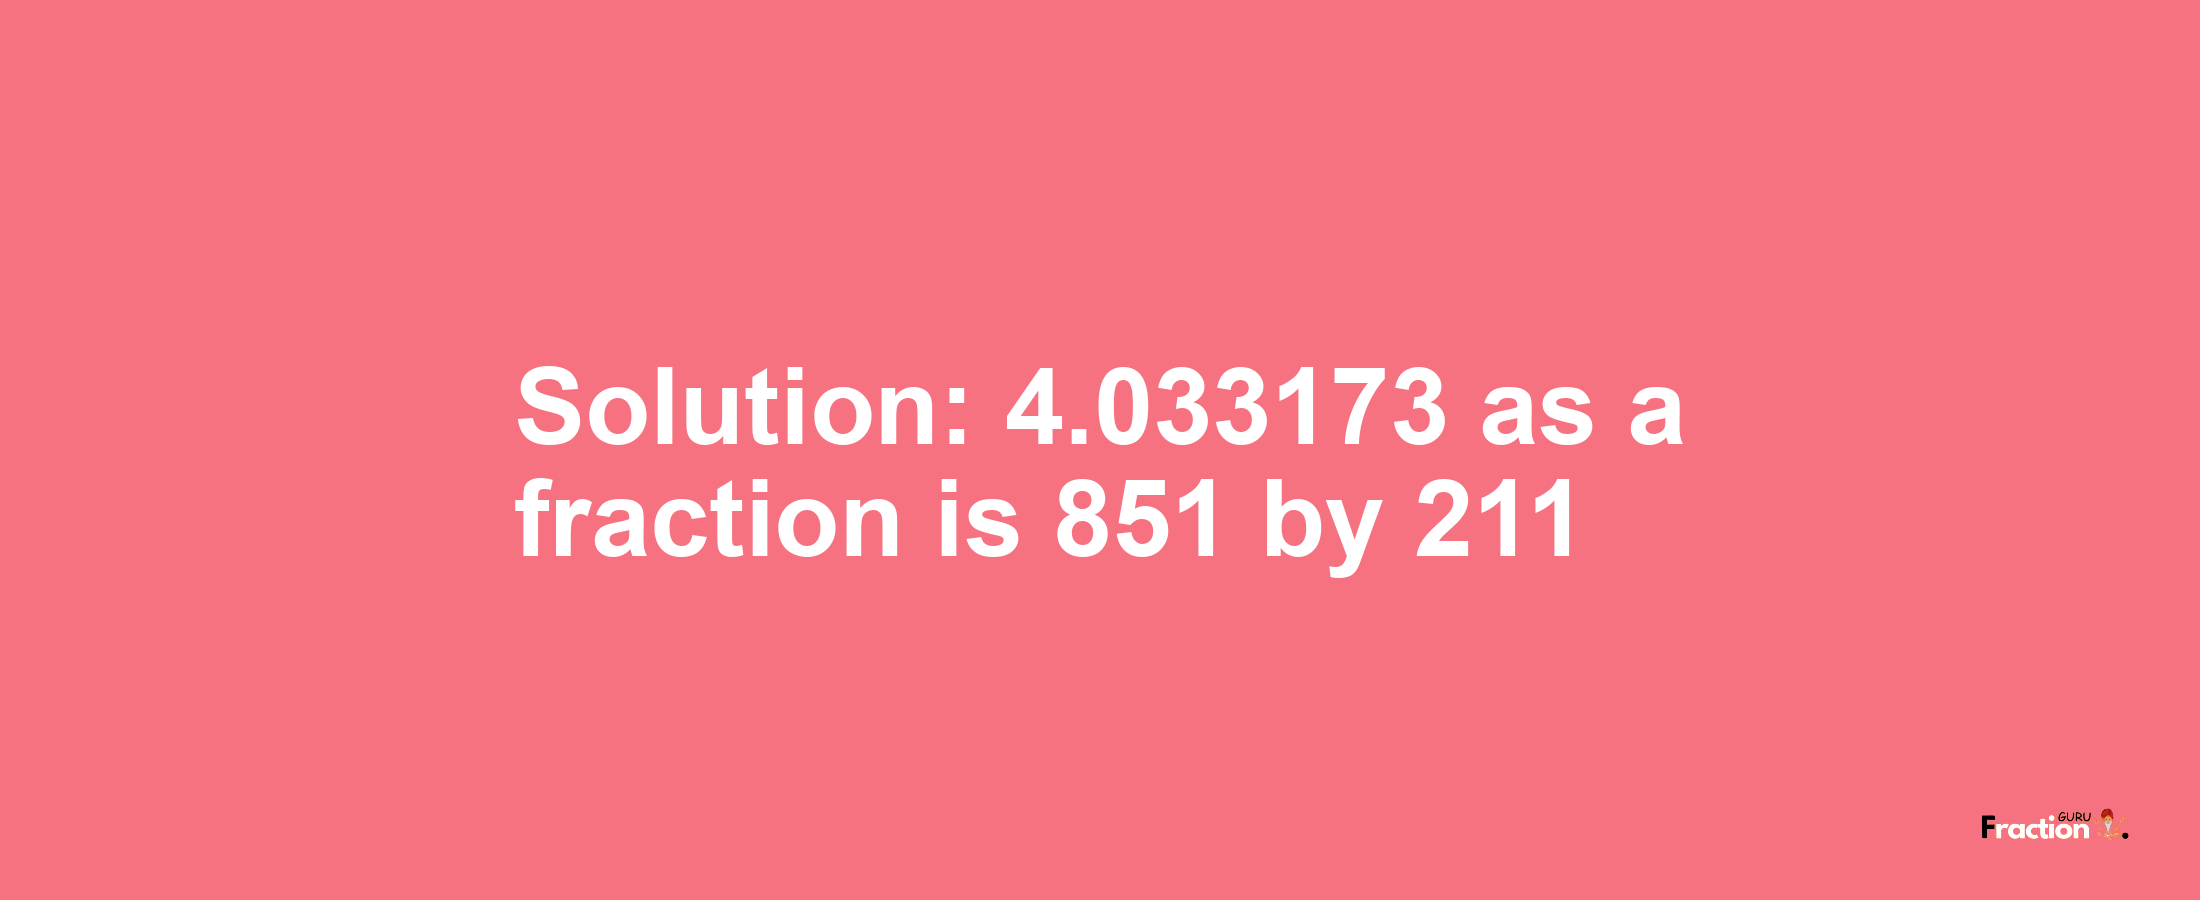 Solution:4.033173 as a fraction is 851/211